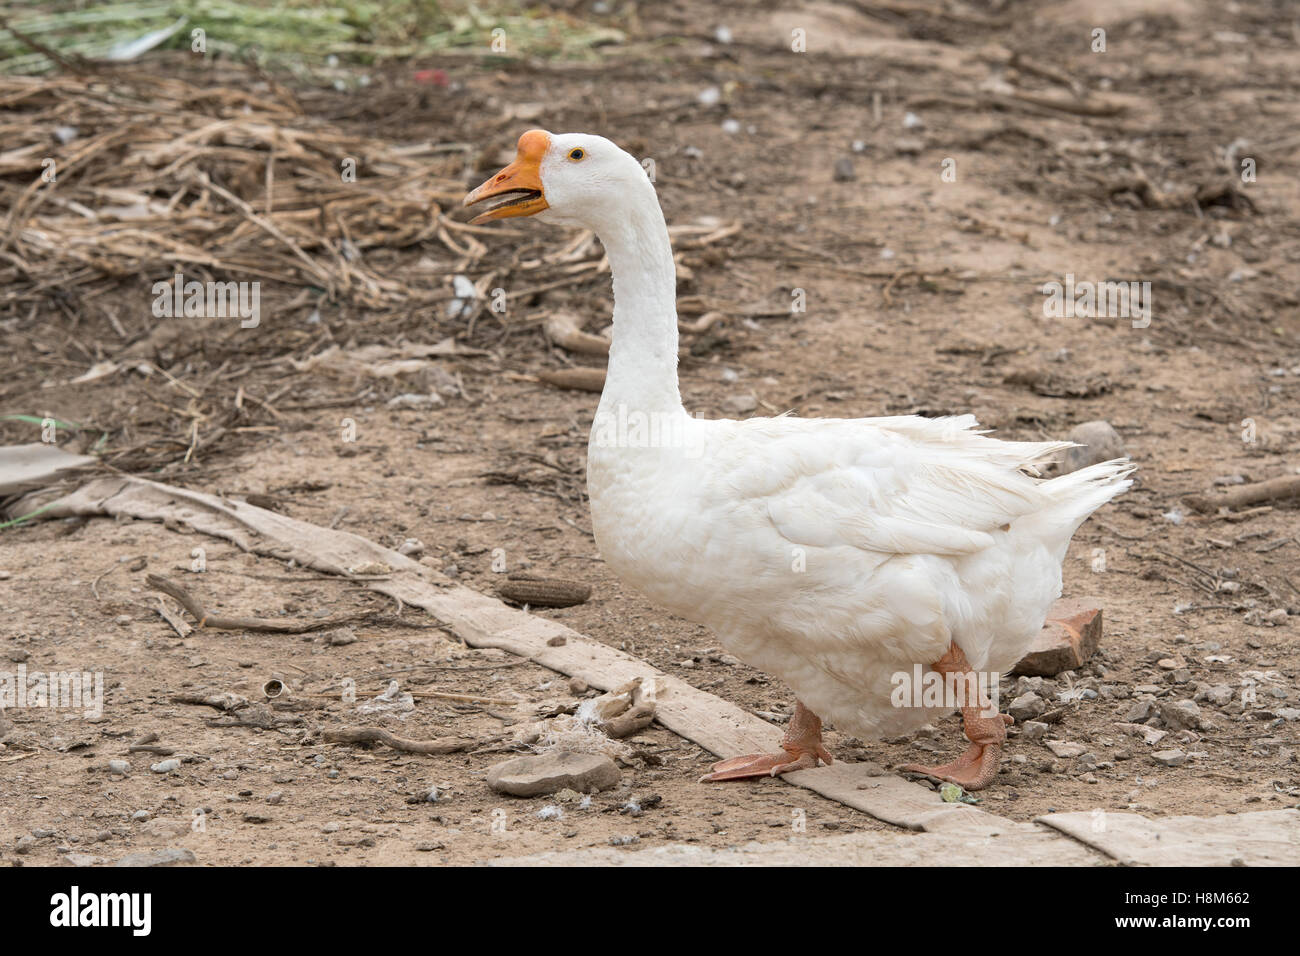 Beijing, China - A domesticated White Chinese goose on a farm near Beijing, China. Stock Photo